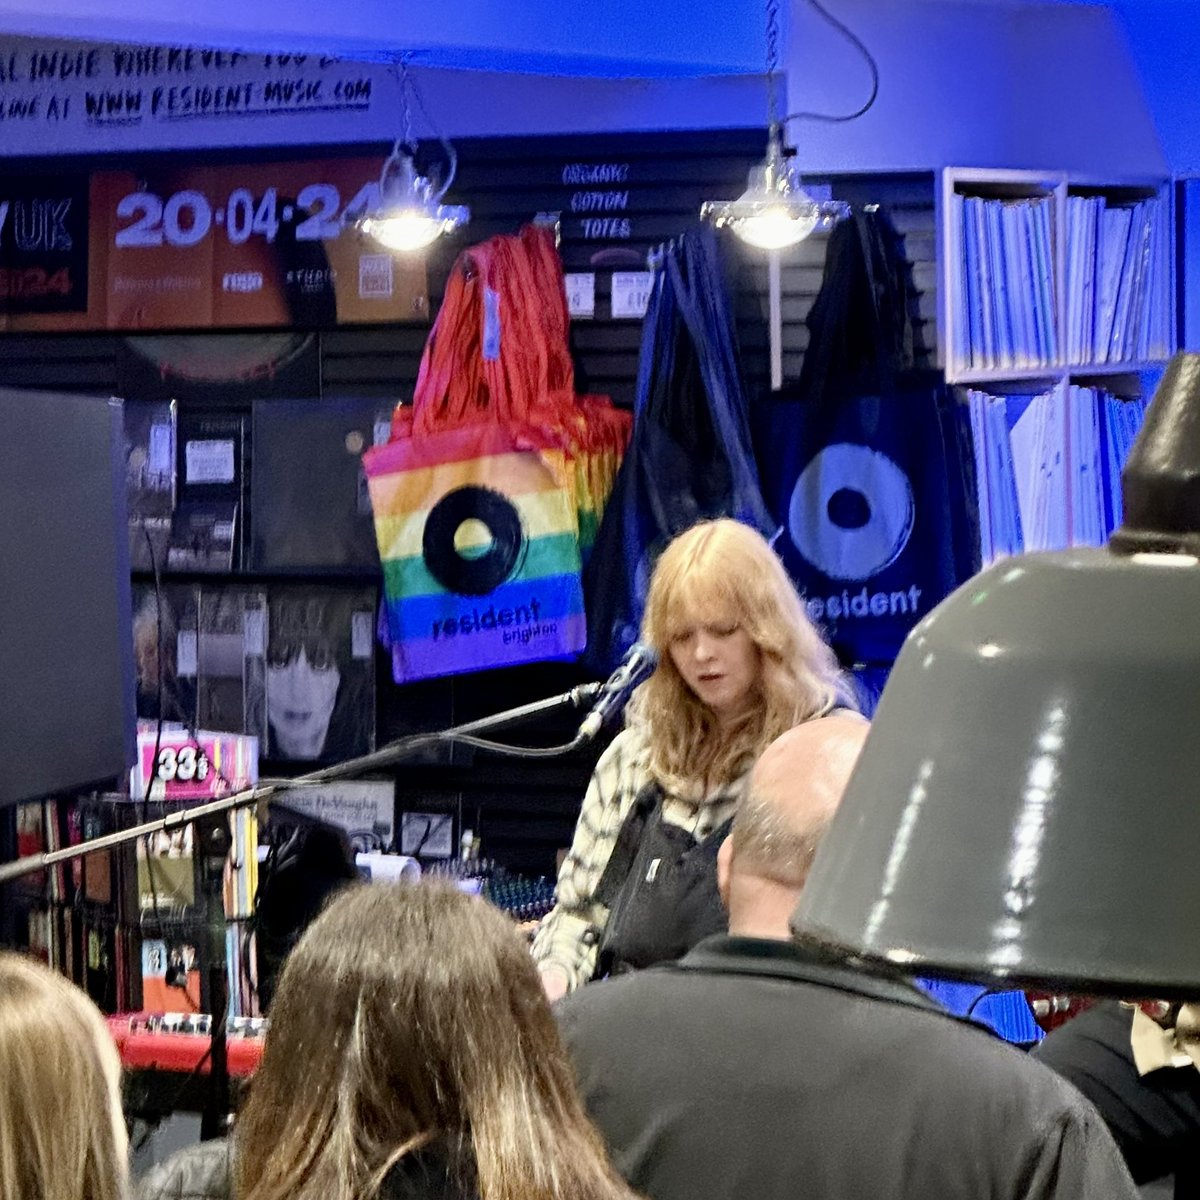 Fantastic and moving instore set from @lucyrosemusic this evening @residentmusic A perfect reminder to keep putting one step in front of the other 💪